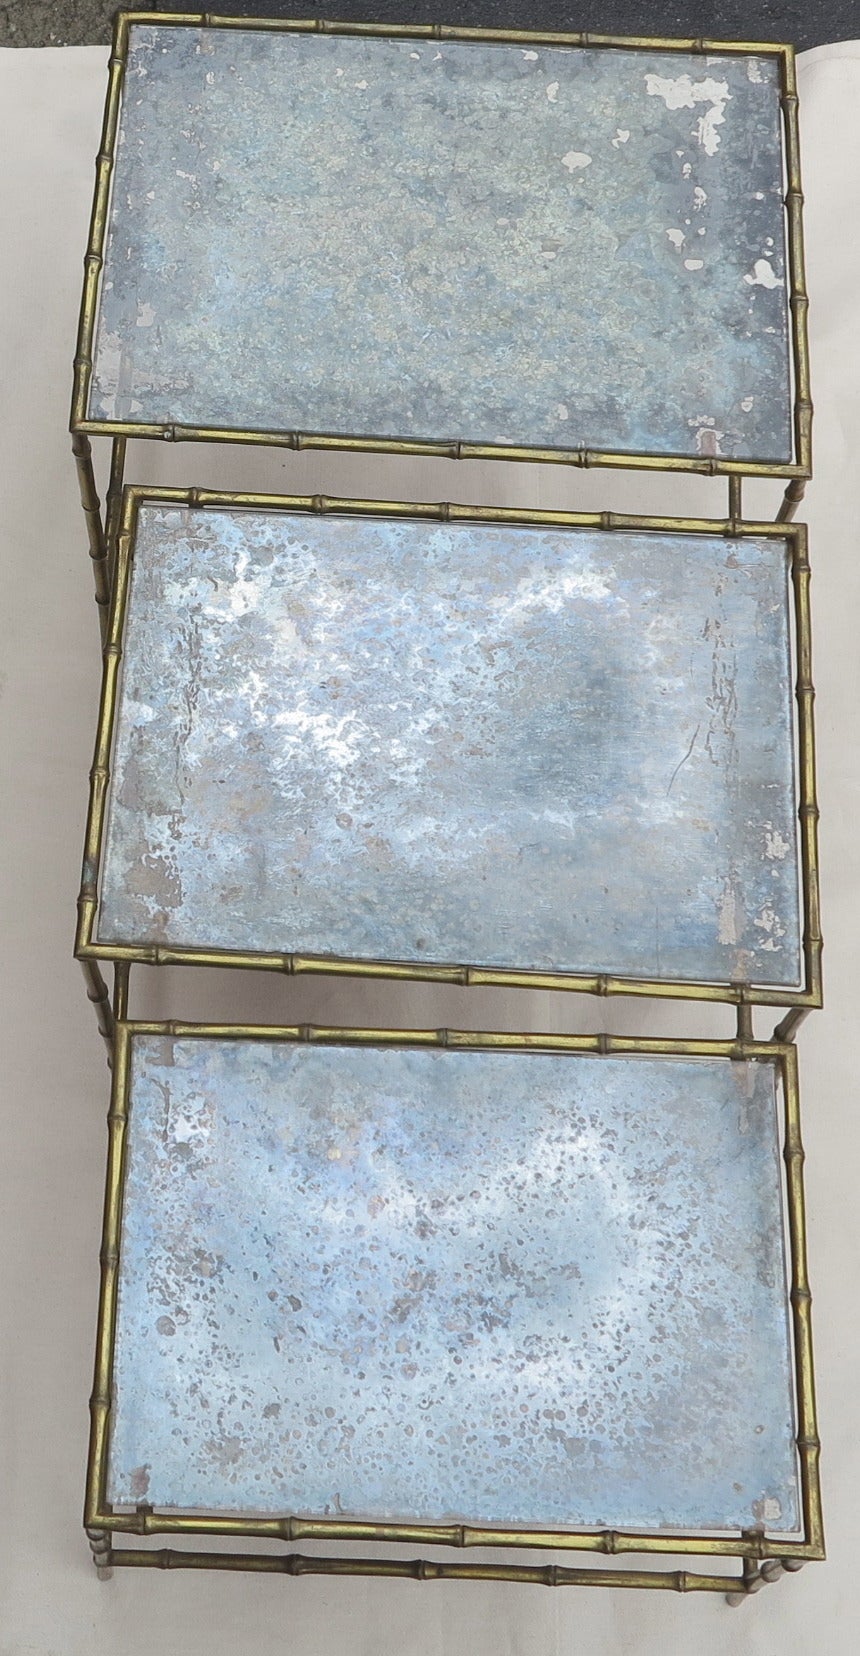 Set of 3 bamboo decor bronze tables and Oxidized mirror top
Sizes : 47X34X H 38 cm , 43X31X H35cm
circa 1950-1970
state use